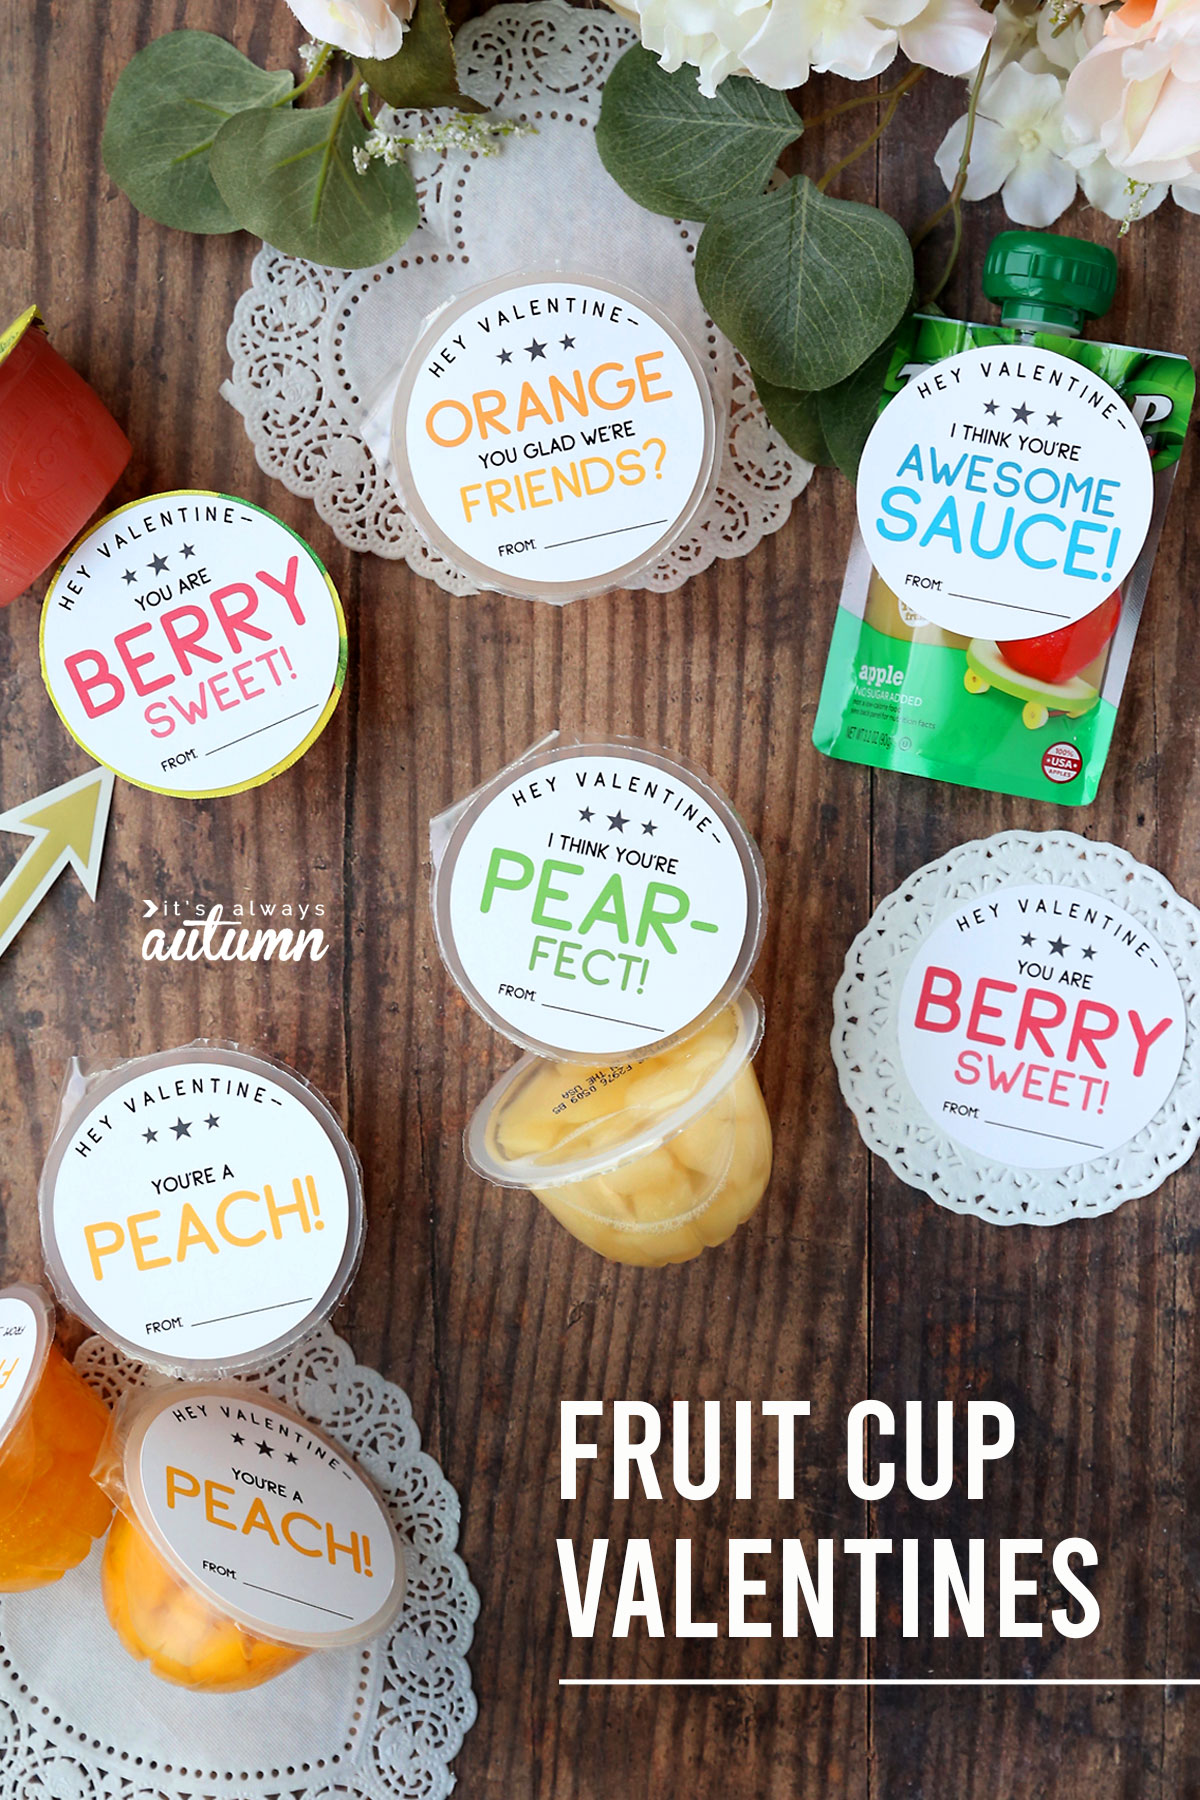 Cute printable fruit cup Valentines are a healthy Valentine option for kids.